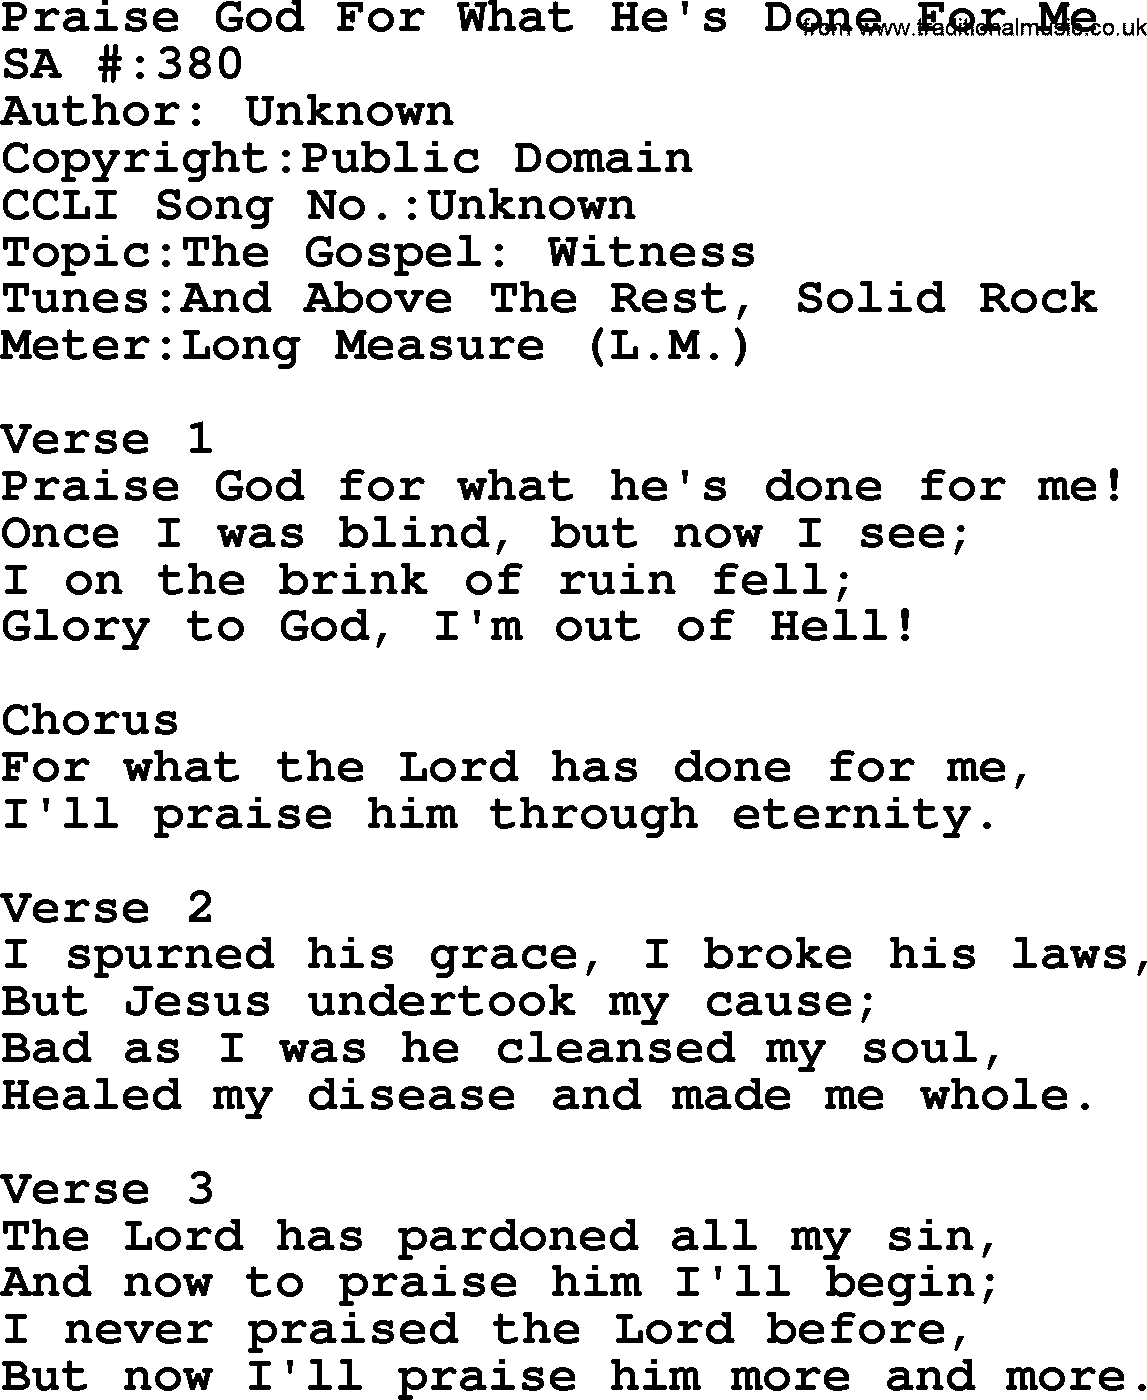 Salvation Army Hymnal, title: Praise God For What He's Done For Me, with lyrics and PDF,